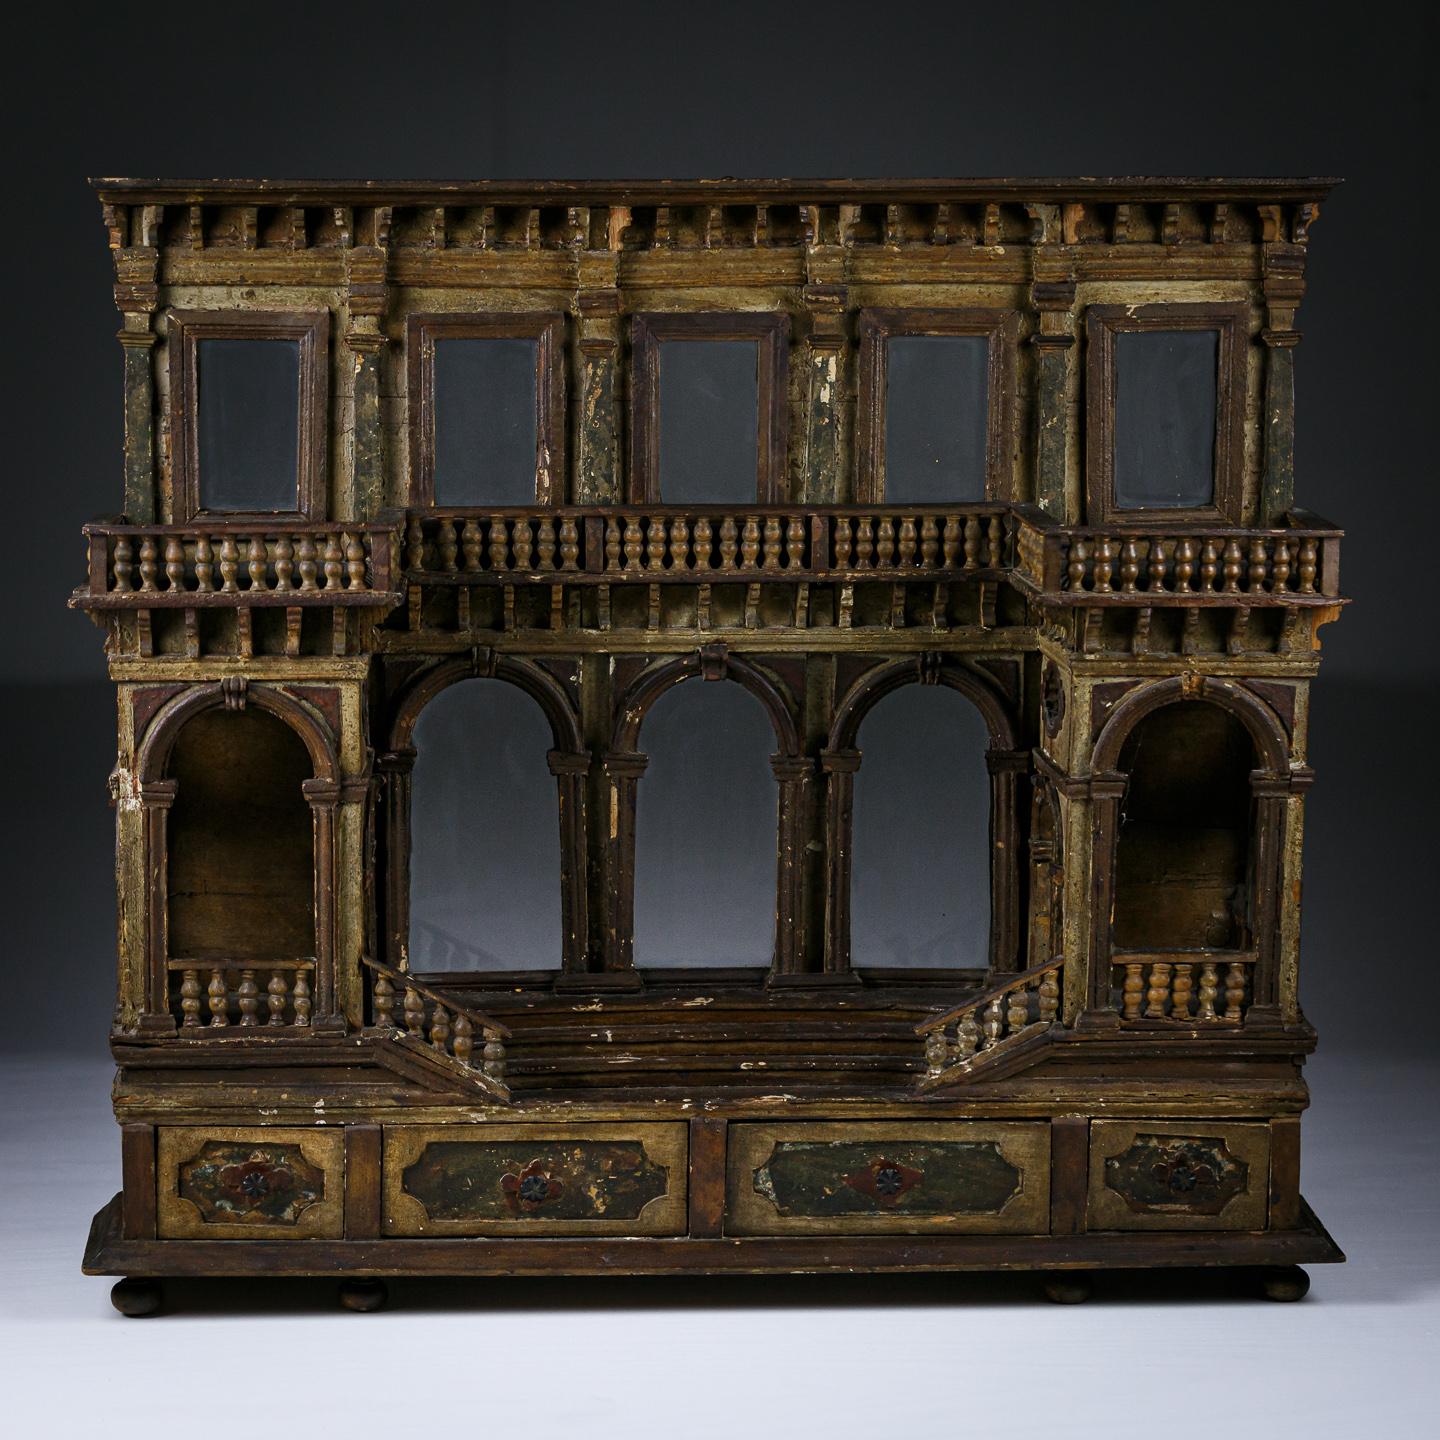 Extraordinary Late 18th Century Neoclassical Maquette Model of a Palais Facade. Original polychrome, Carved Wood. Private Paris Collection. France Circa 1780.